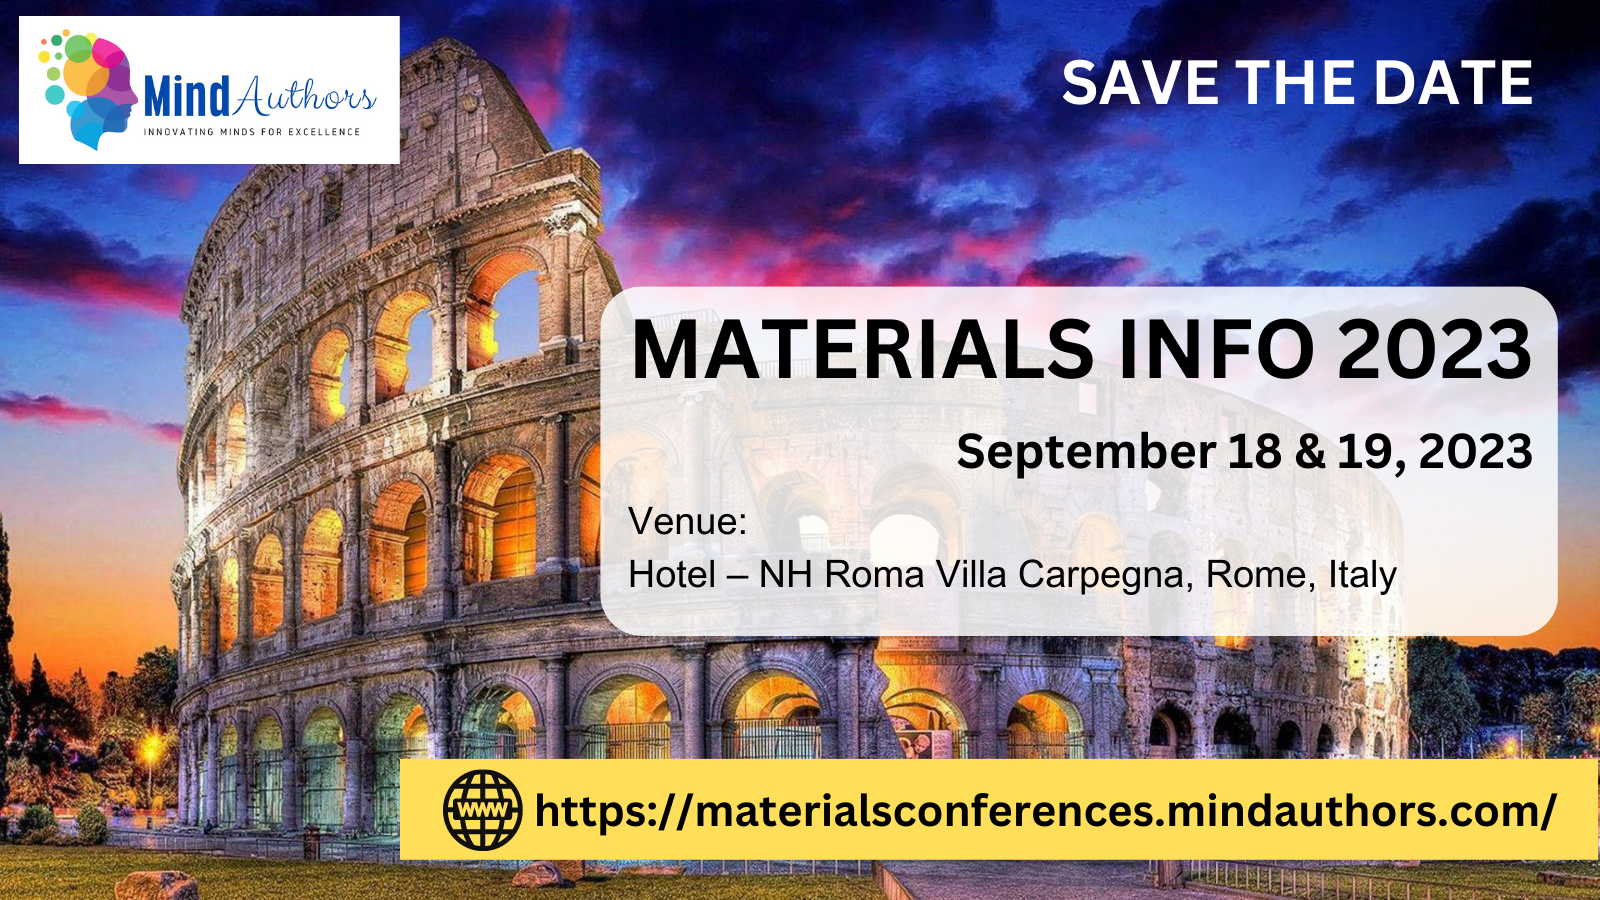 6th World Congress on Materials Science and Engineering